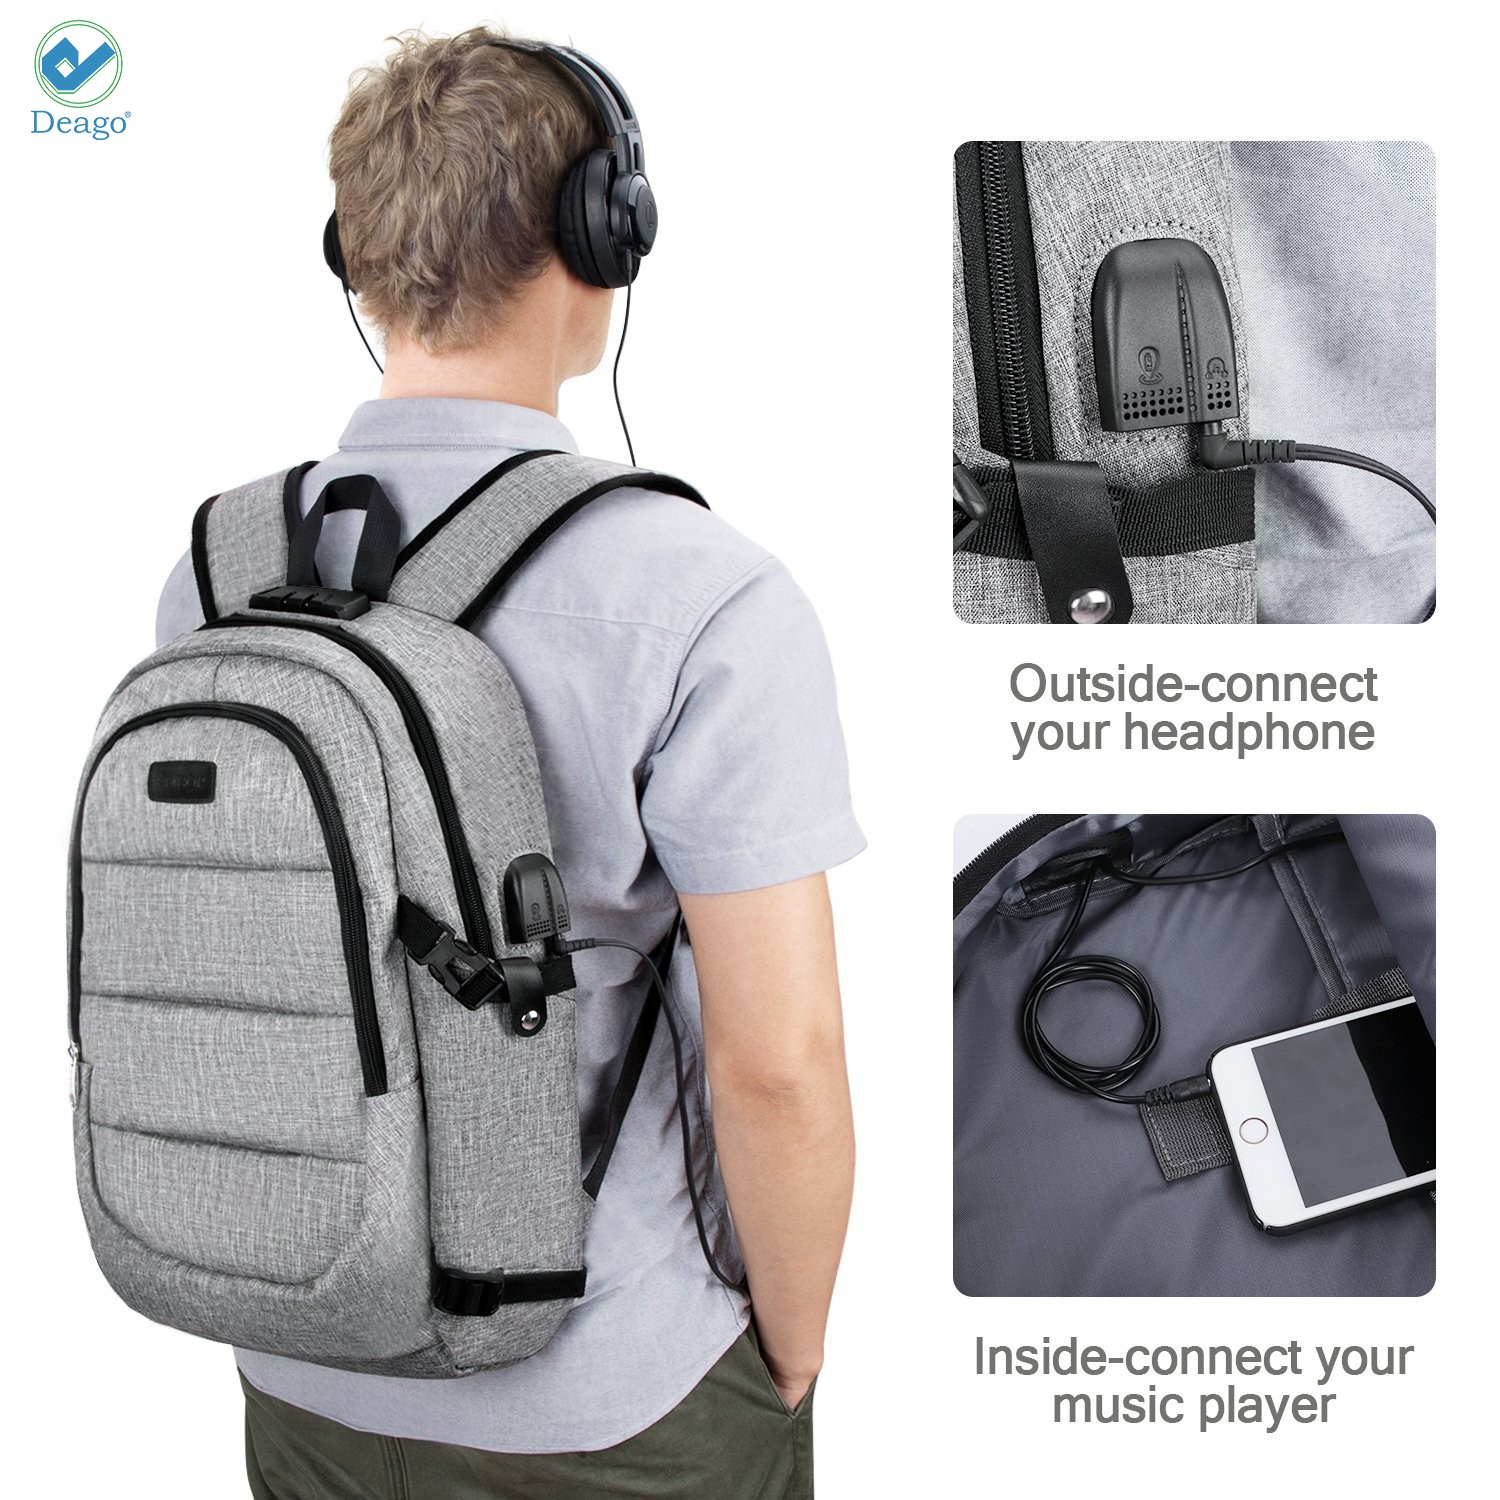 Deago Laptop Backpack, Business Anti Theft with lock Waterproof Travel Backpack with USB Charging Port for Laptops up to 17 inches (Gray) - image 3 of 9